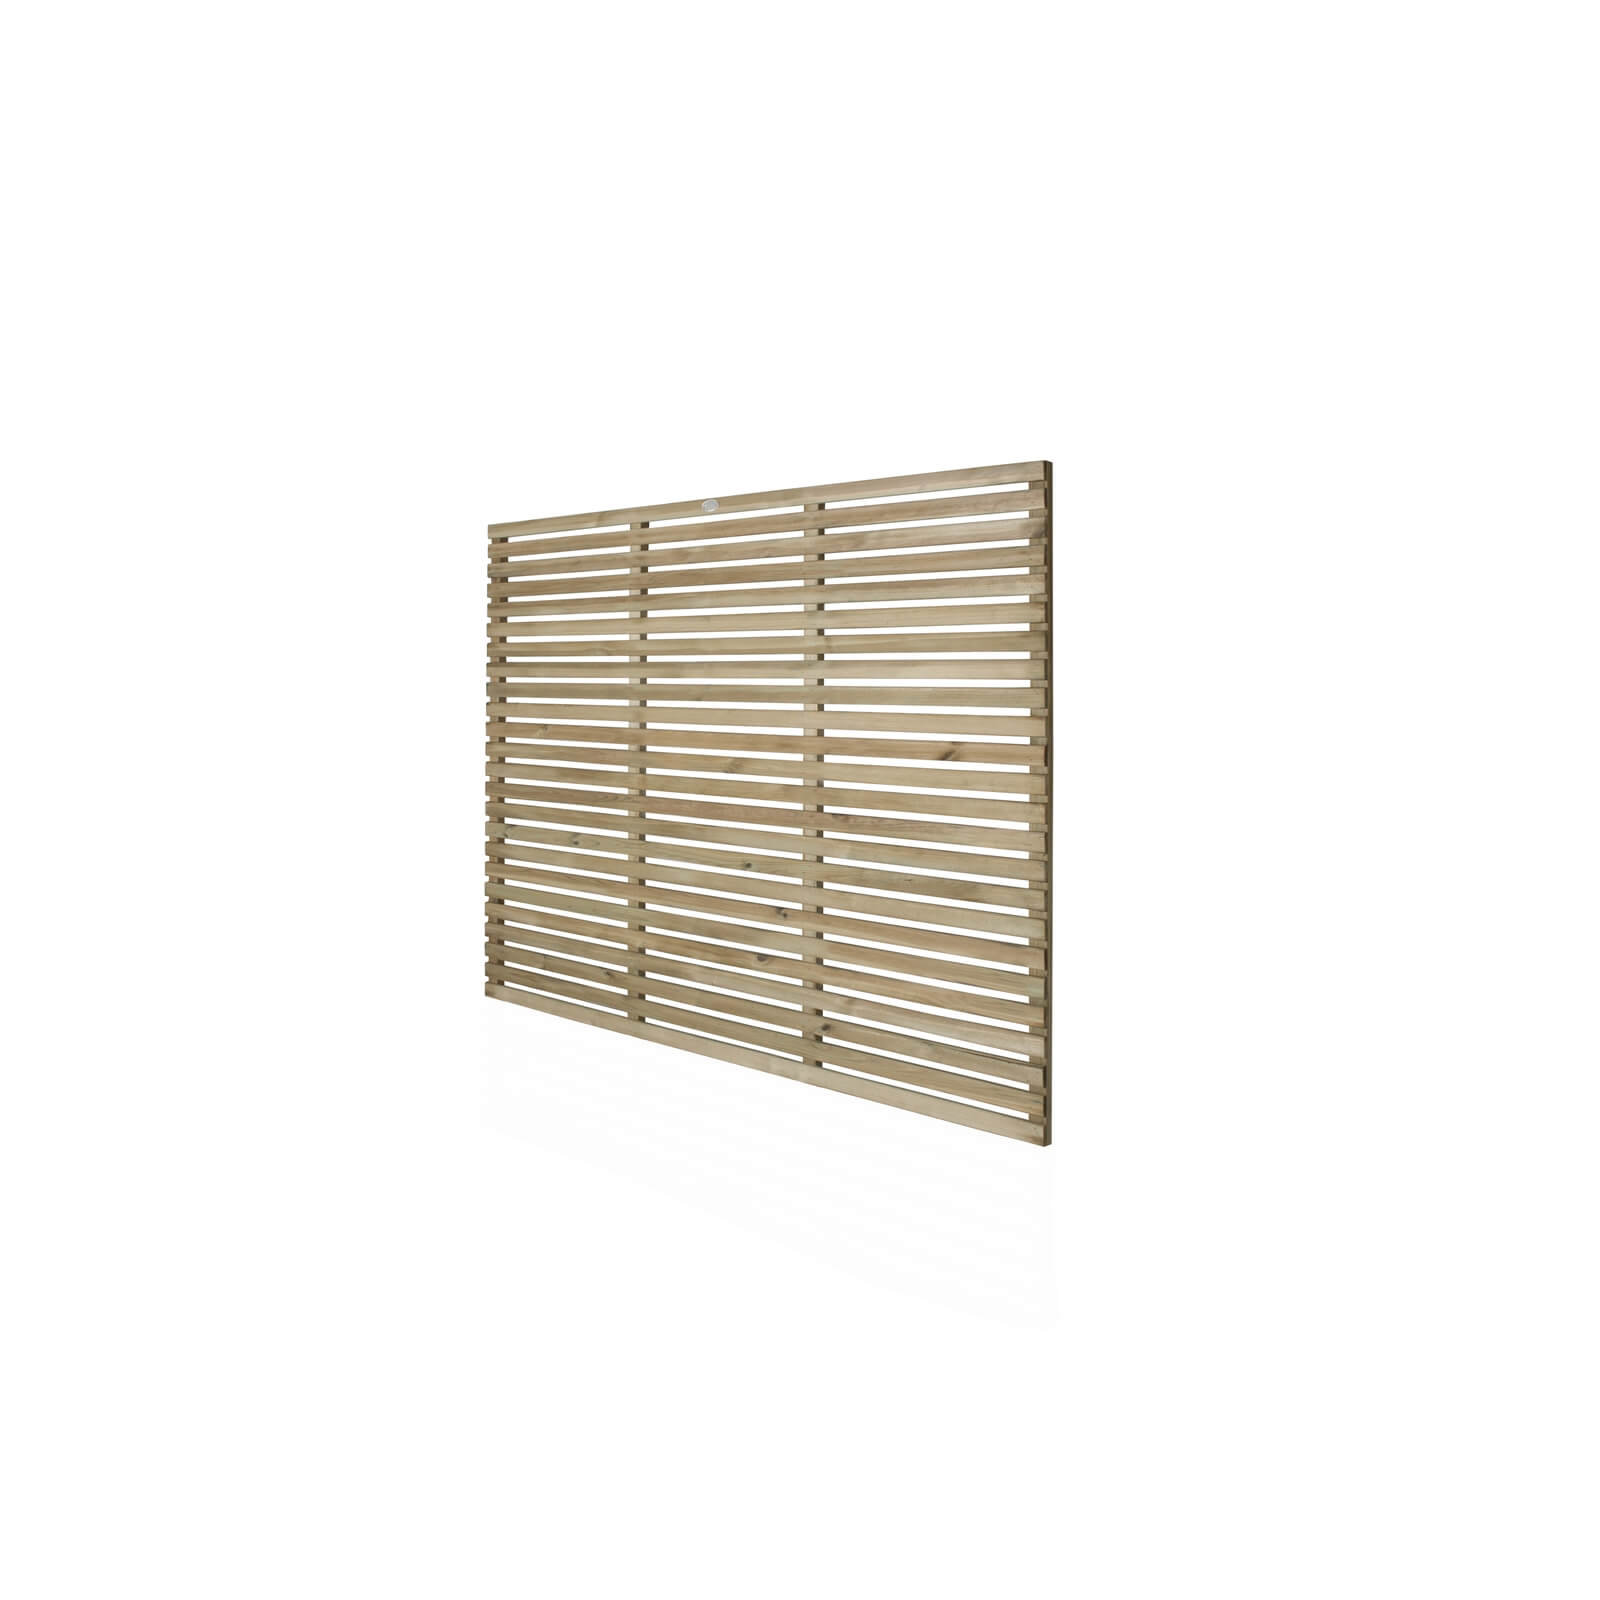 6ft x 5ft (1.8m x 1.5m) Pressure Treated Contemporary Slatted Fence Panel - Pack of 5